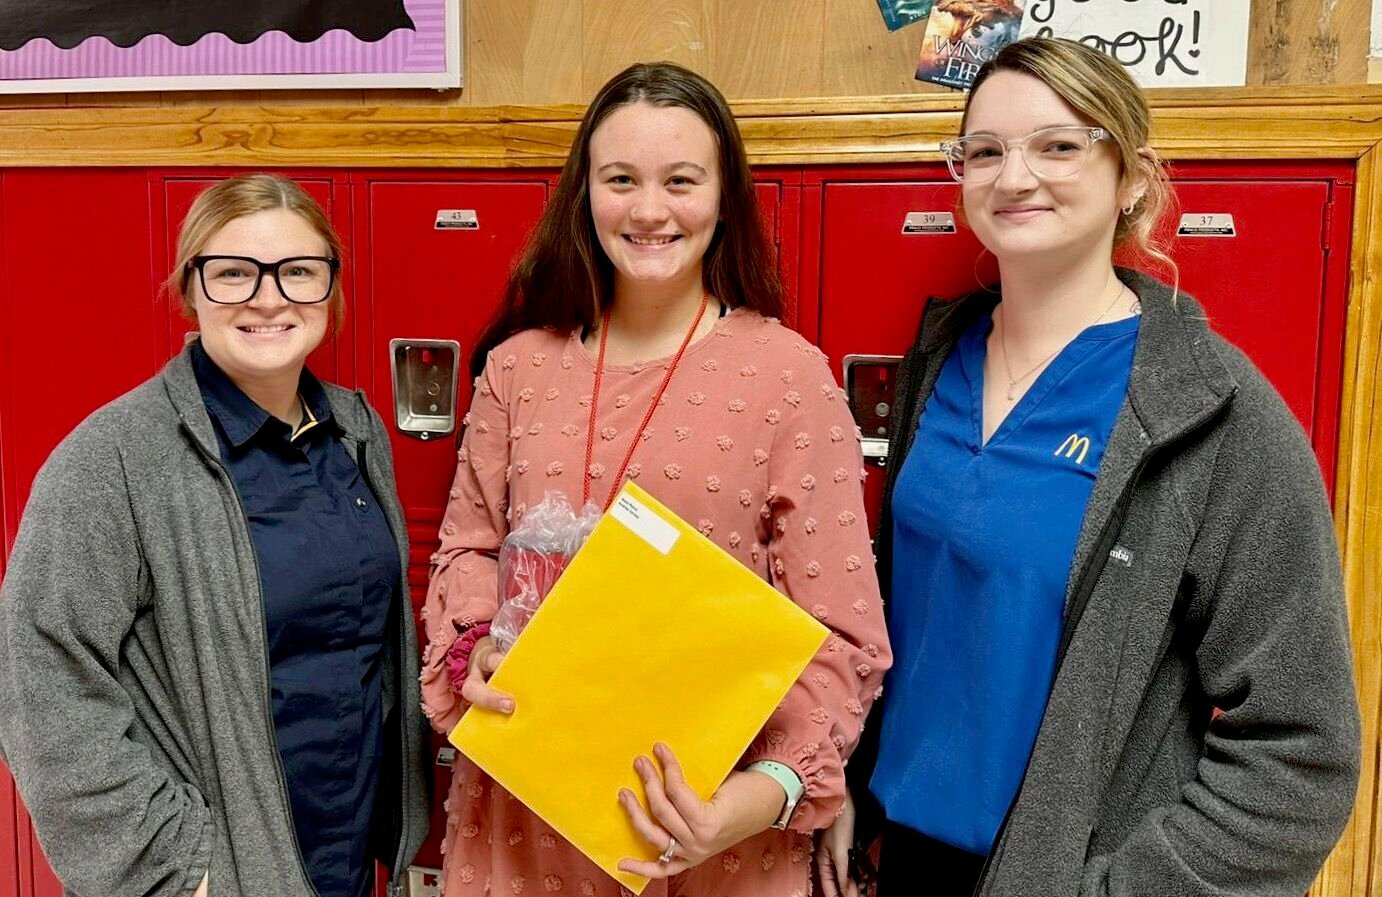 McDonald’s of West Plains General Manager Kayla Osburn, left, and McDonald’s of West Plains People Experience Lead Ashley Loucks, right, present the McDonald’s Outstanding Educator Award Recipient to West Plains Middle School fifth grade teacher Andrea Varney.